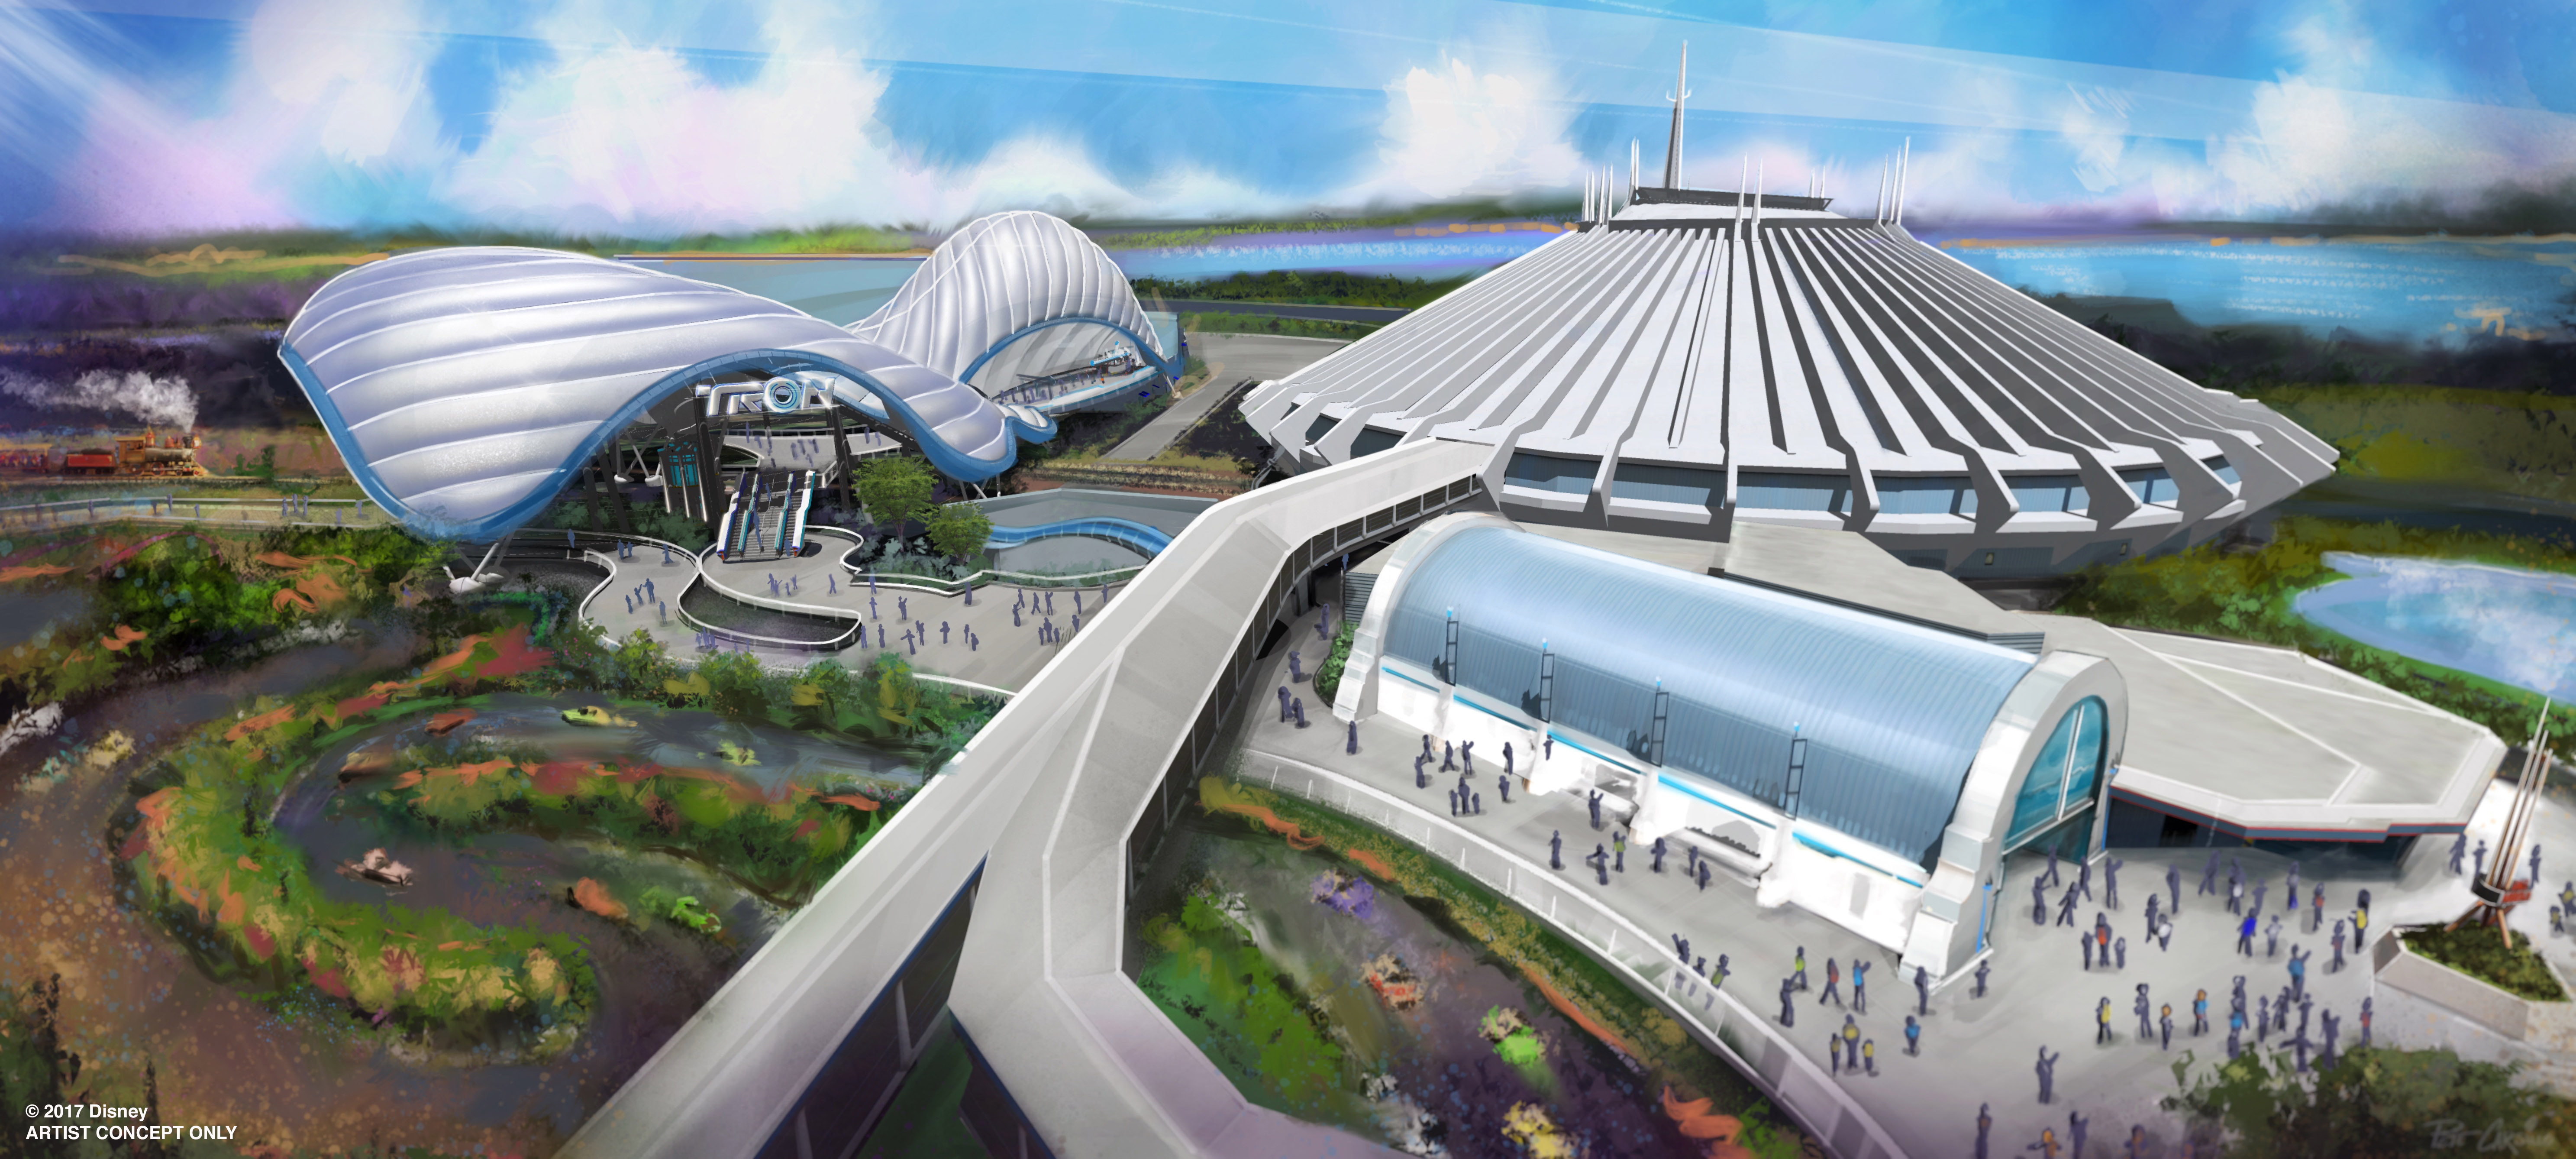 The new Tron attraction will sit in an entirely new area right next to the Space Mountain attraction at Magic Kingdom Park. Bob Chapek, Chairman of Walt Disney Parks & Resorts, made the announcement during the Walt Disney World Parks and Resorts presentation at D23 Expo 2017. Regular Disney Parks Blog readers know that the TRON Lightcycle Power Run attraction at Shanghai Disneyland is a coaster-style attraction where riders board a train of two-wheeled Lightcycles. It offers access into the energy, lights and excitement of TRON’s high-tech universe and is one of the most thrilling adventures at any Disney park. Also, during today’s presentation, Bob said the plan is to open the Tron attraction in time for Walt Disney World’s 50th anniversary in 2021. Keep checking the Disney Parks Blog for more updates on this future attraction.